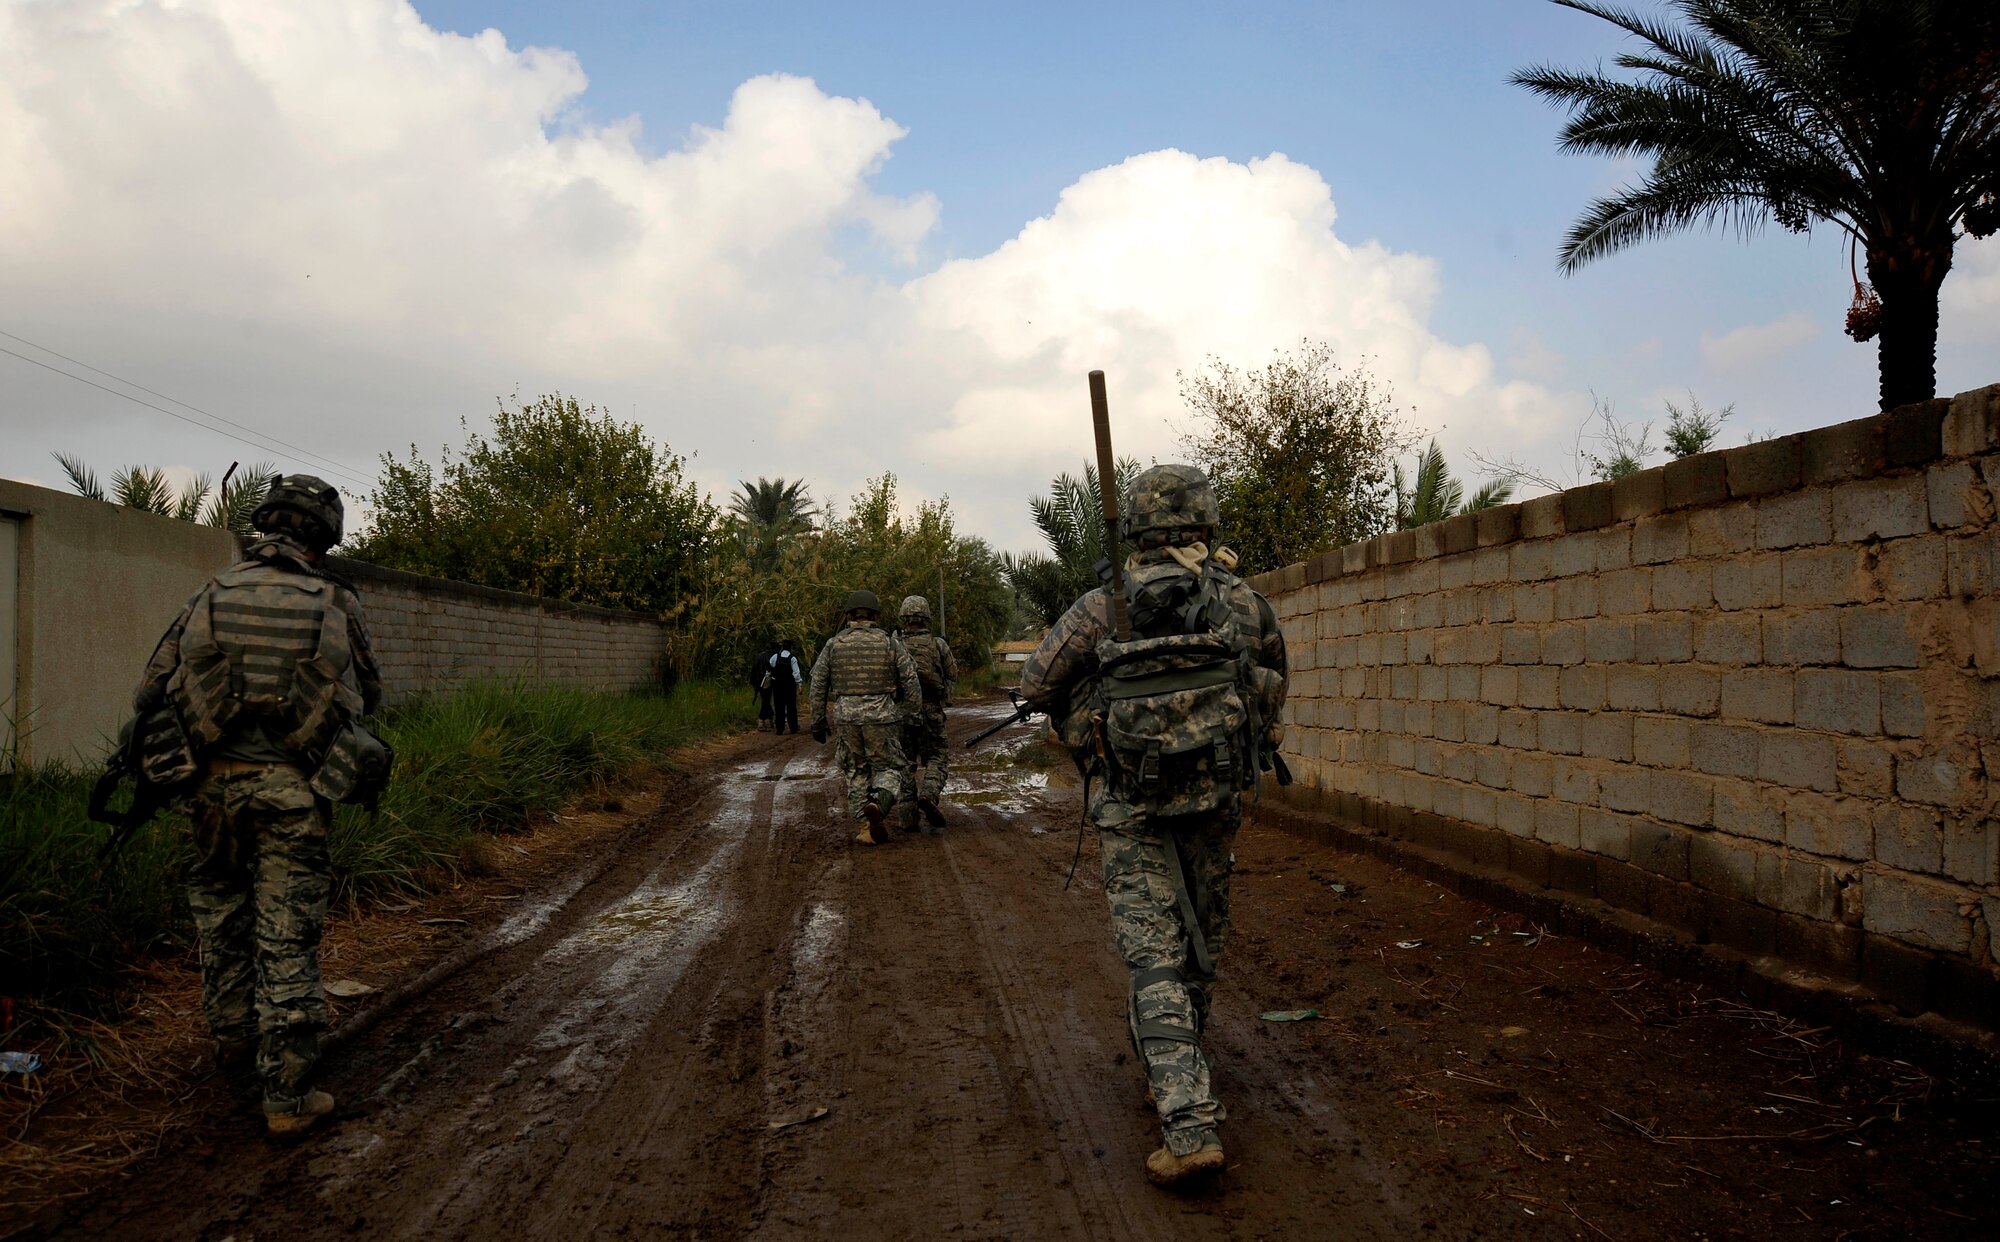 U.S. Air Force Defenders from the 732nd Expeditionary Security Forces Squadron Det. 2, deployed to Baghdad, Iraq, conduct a foot patrol through a Baghdad neighborhood in an effort to assess local checkpoints set up by the Iraqi Police, Nov. 19, 2009. (U.S. Air Force photo/Staff Sgt. Angelita Lawrence)